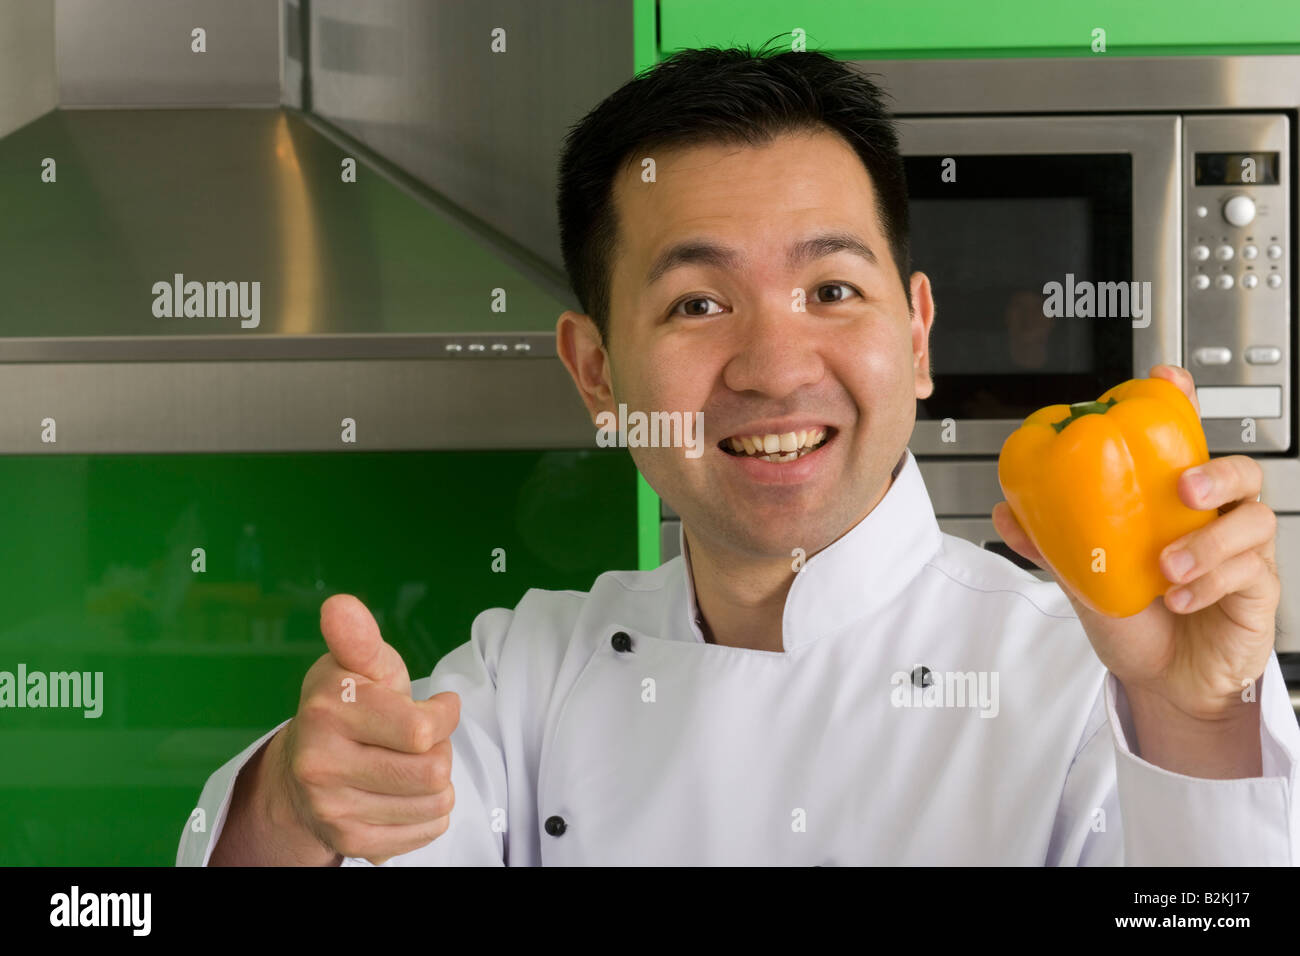 Portrait of a male chef holding a yellow bell pepper and showing a thumbs up sign Stock Photo